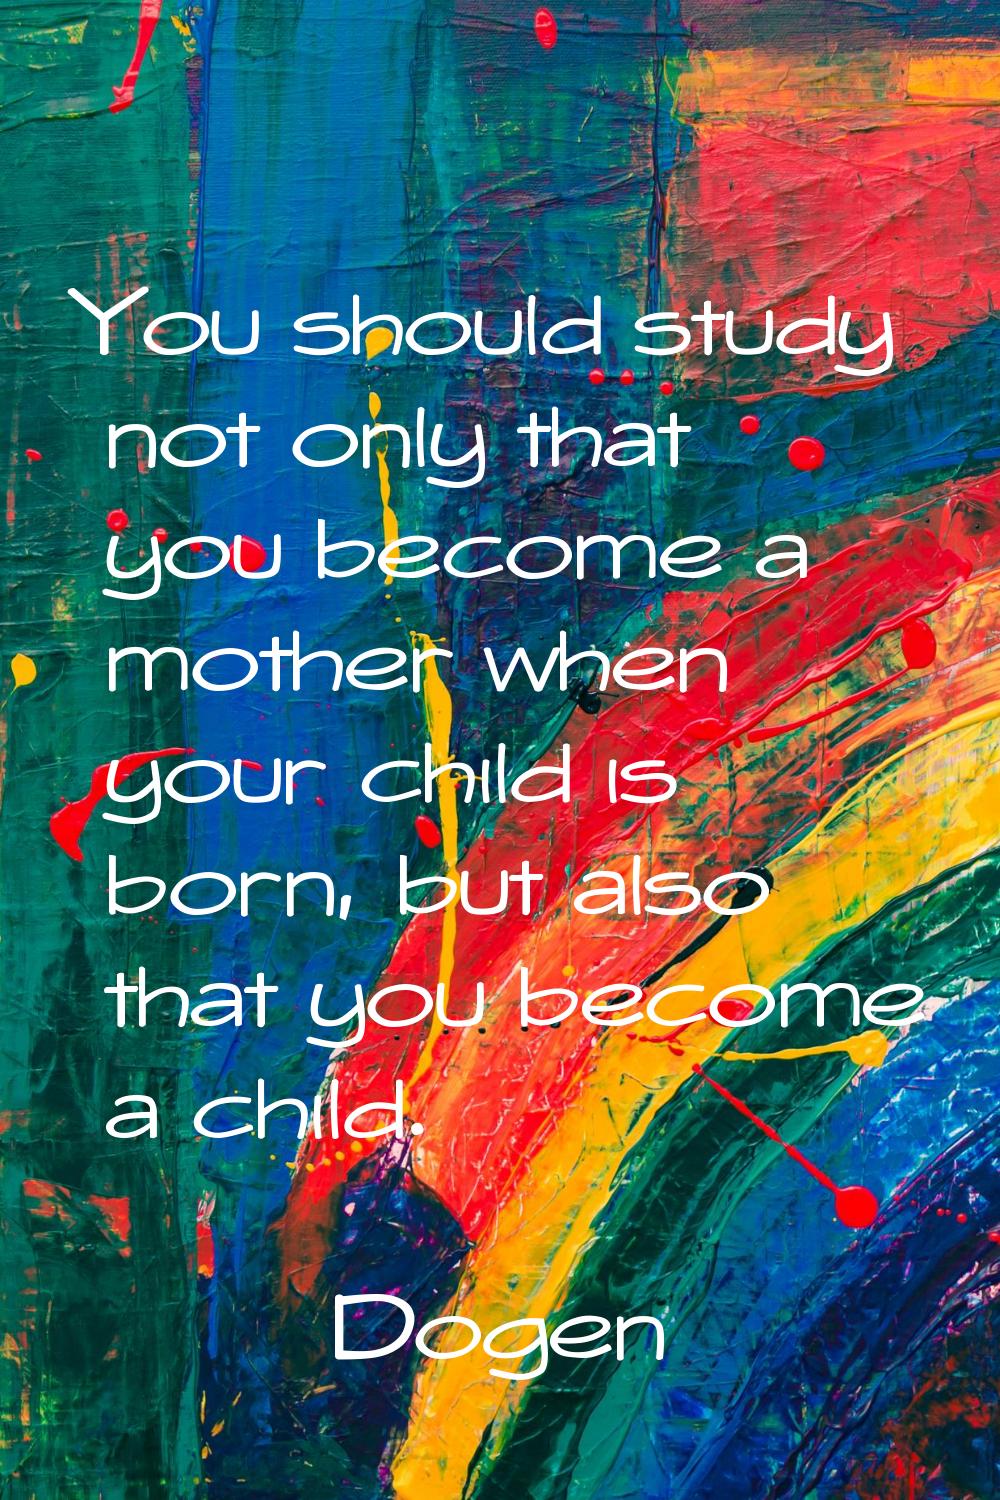 You should study not only that you become a mother when your child is born, but also that you becom